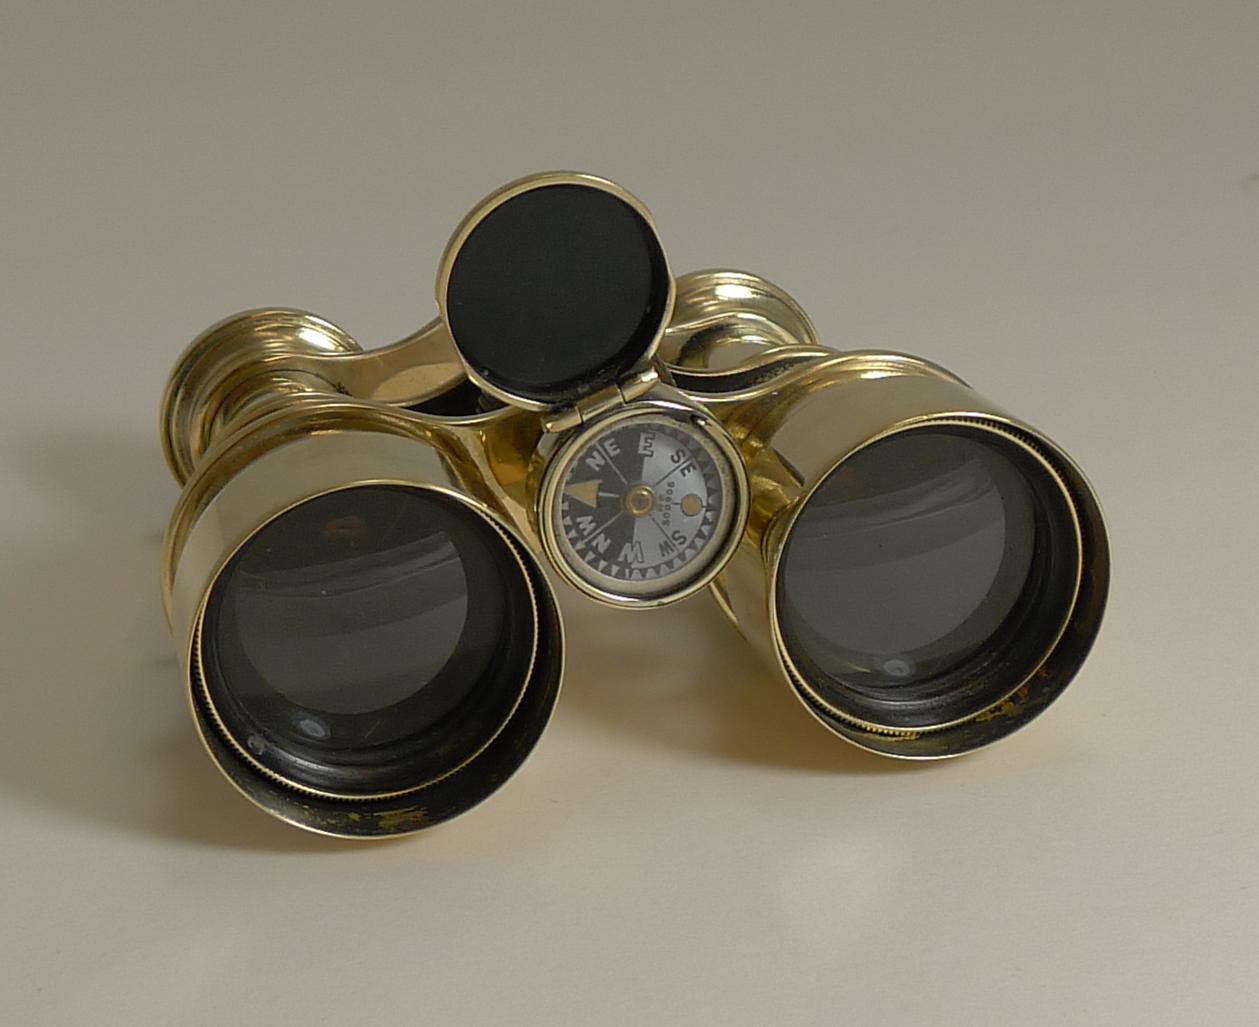 Antique English Field Glasses / Binoculars by Lawrence and Mayo - With Compass 4